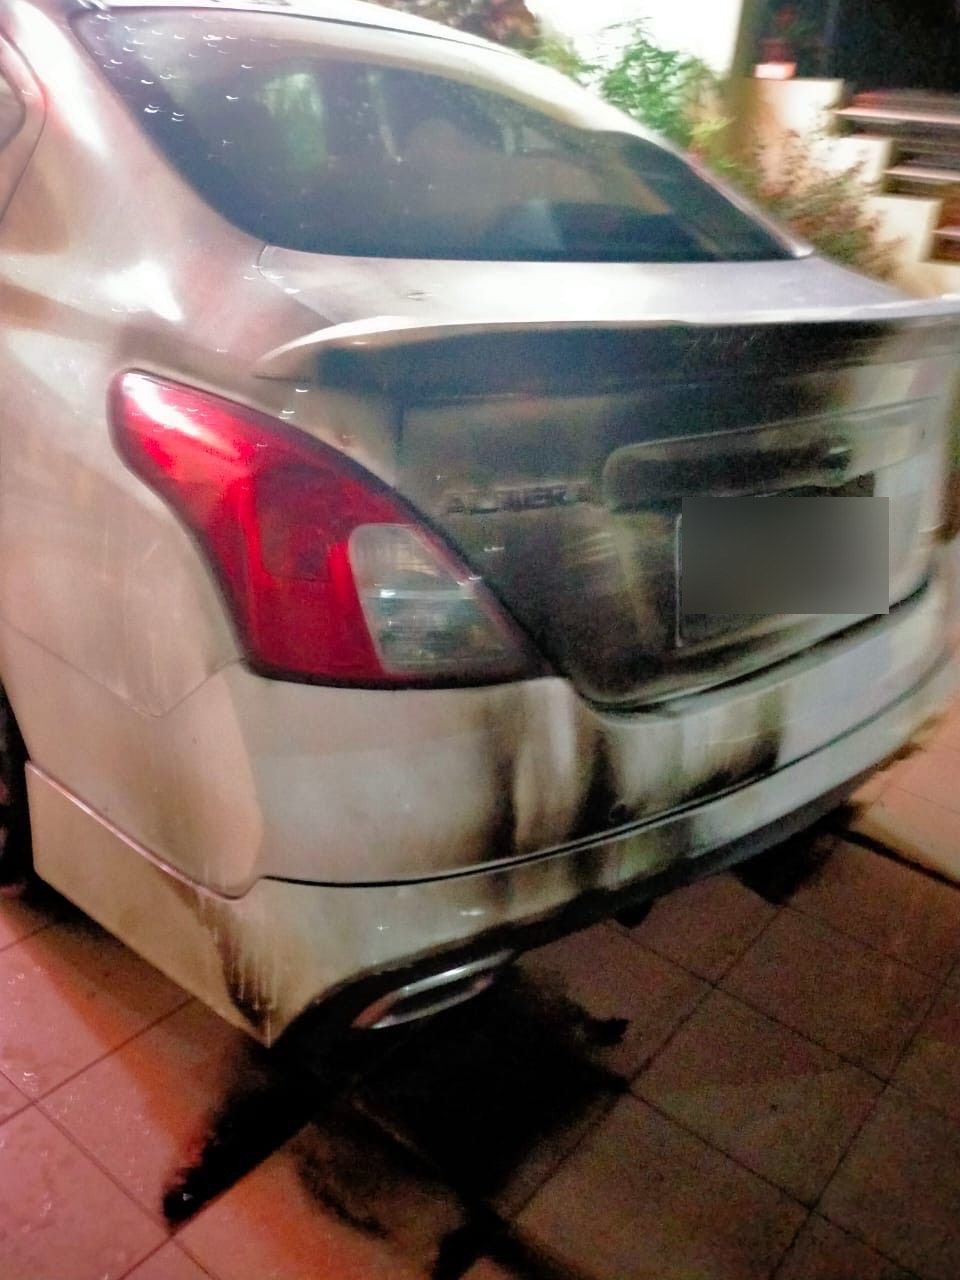 son owes ah long money, but parents' neighbour targeted in arson attack